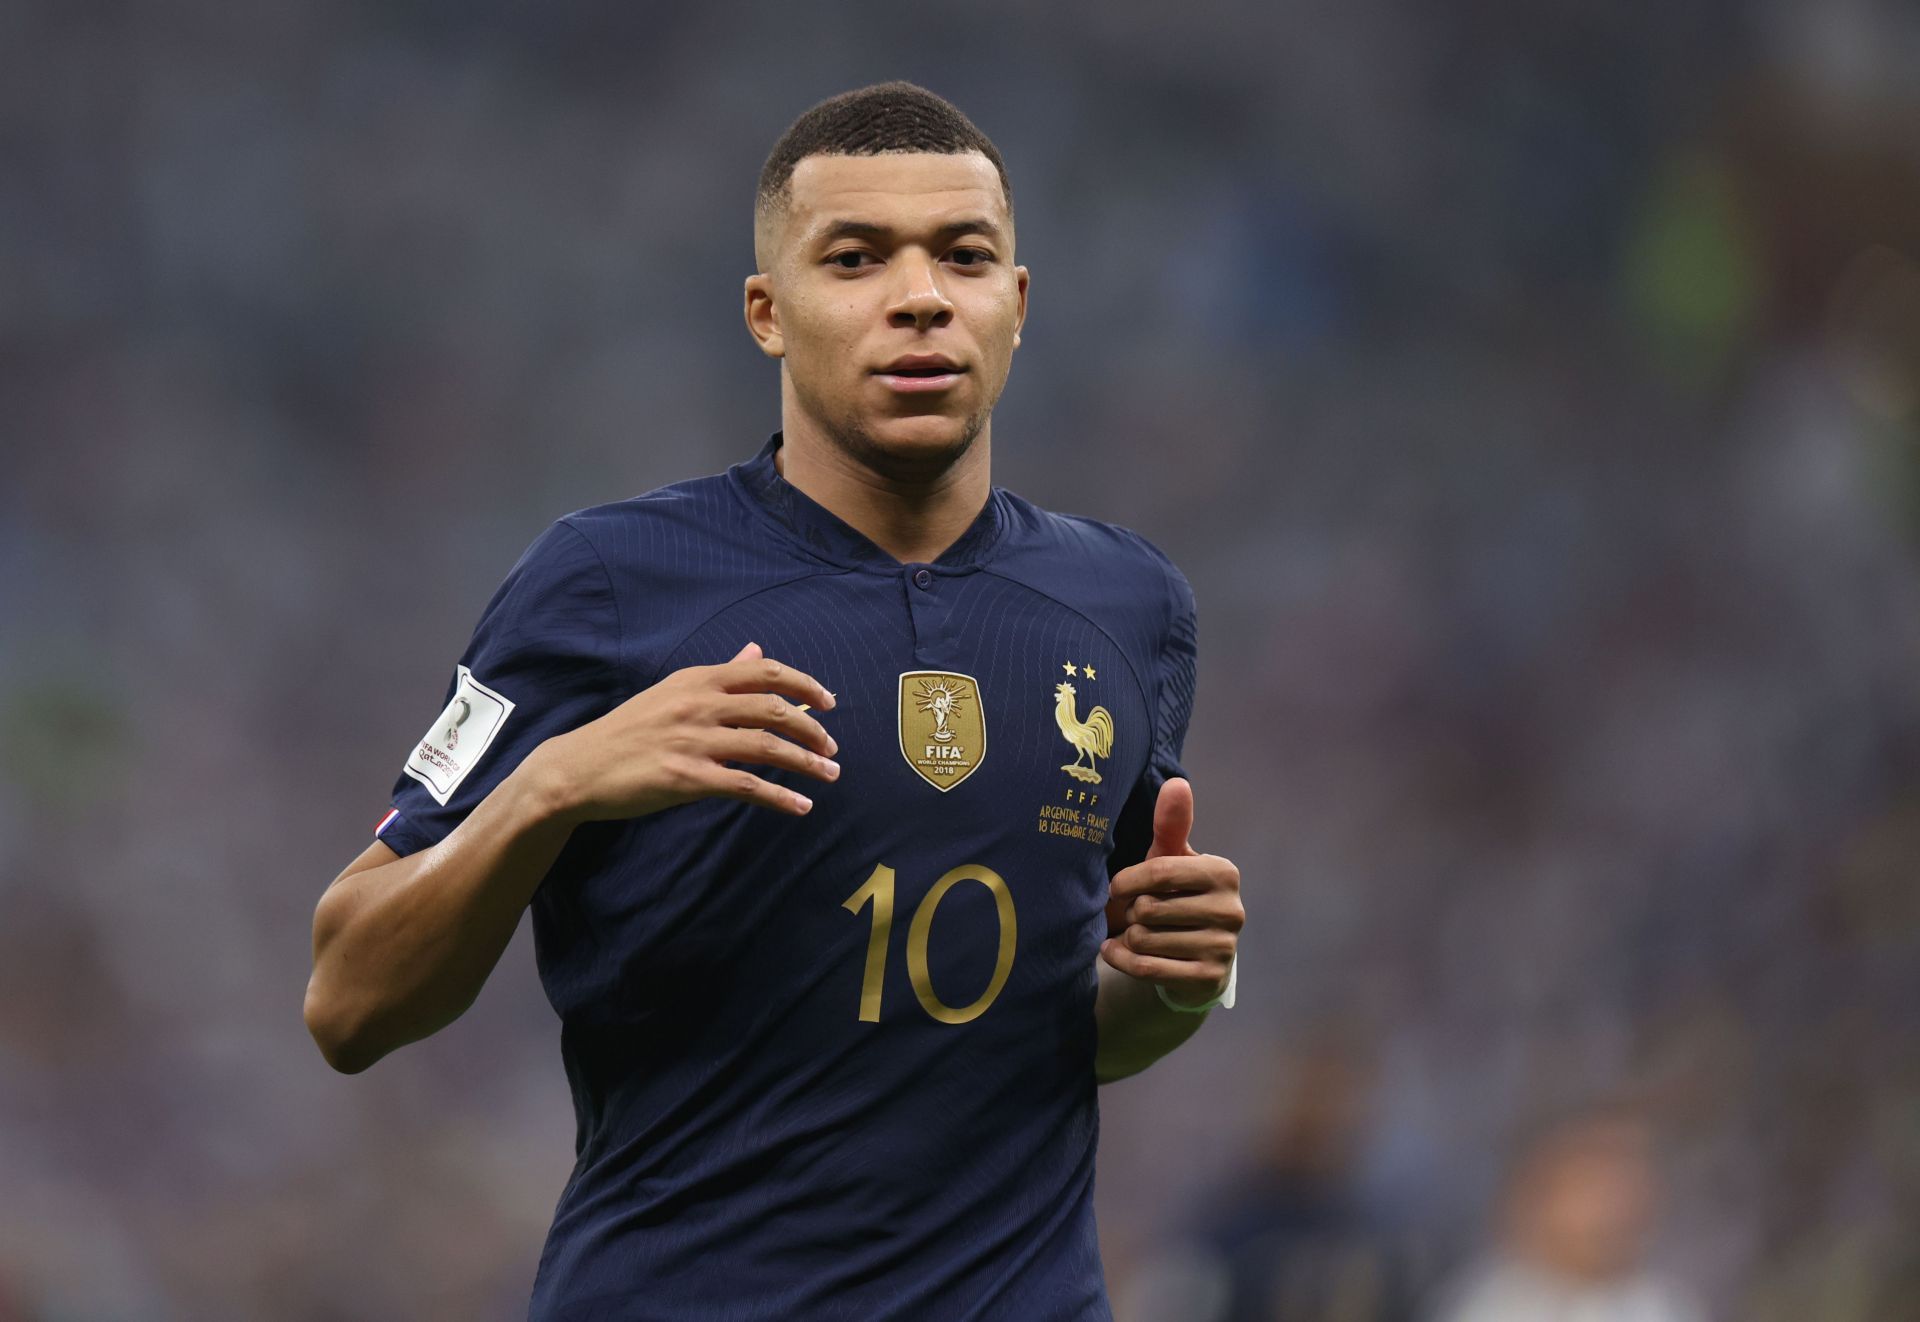 Kylian Mbappe was a standout performer at the World Cup.